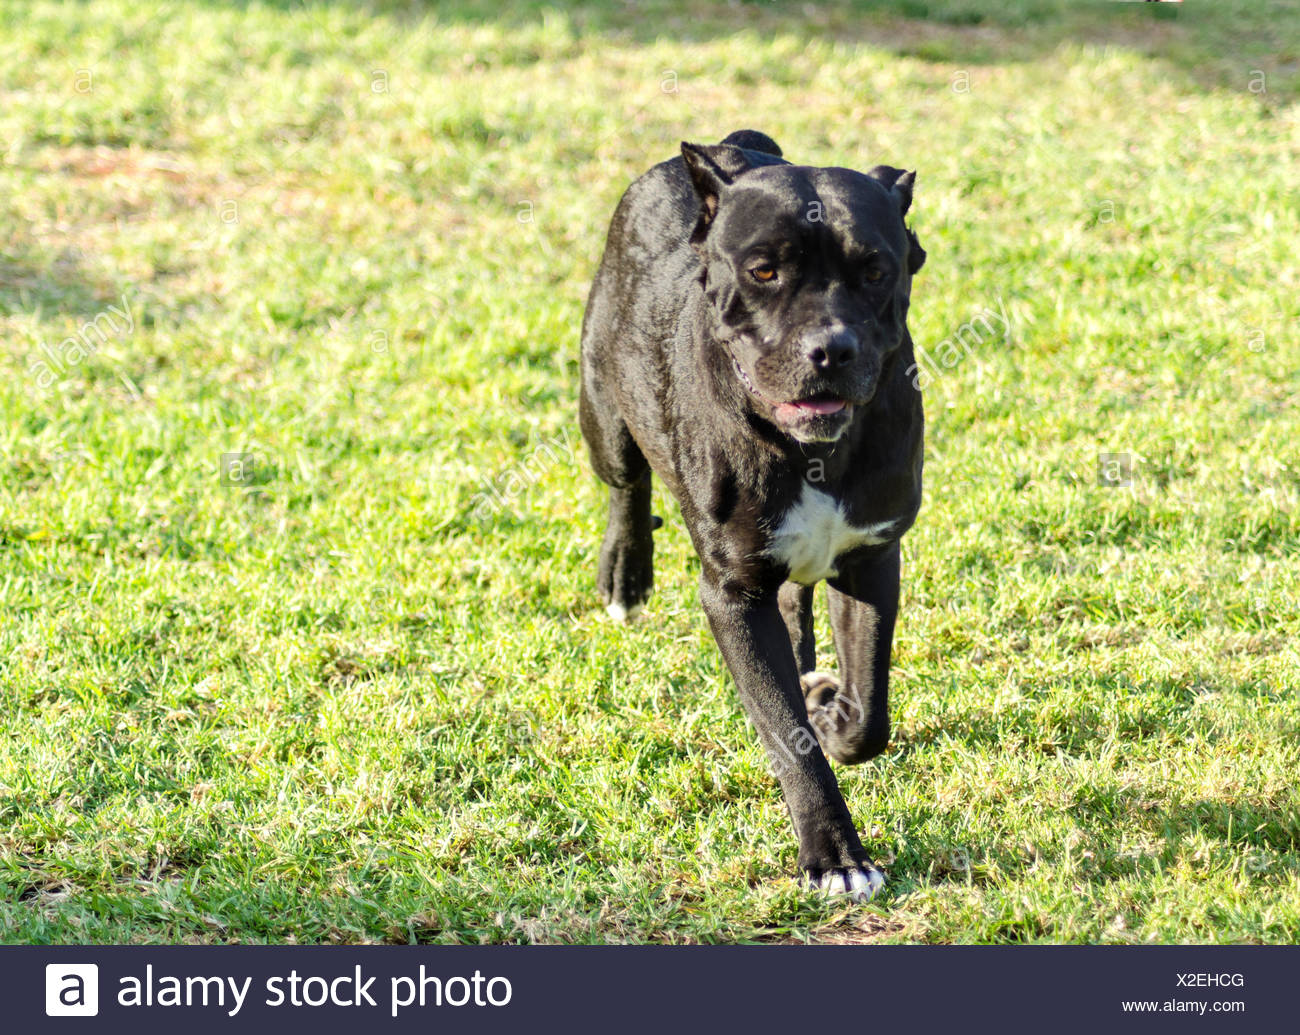 A Young Beautiful Black And White Medium Sized Cane Corso